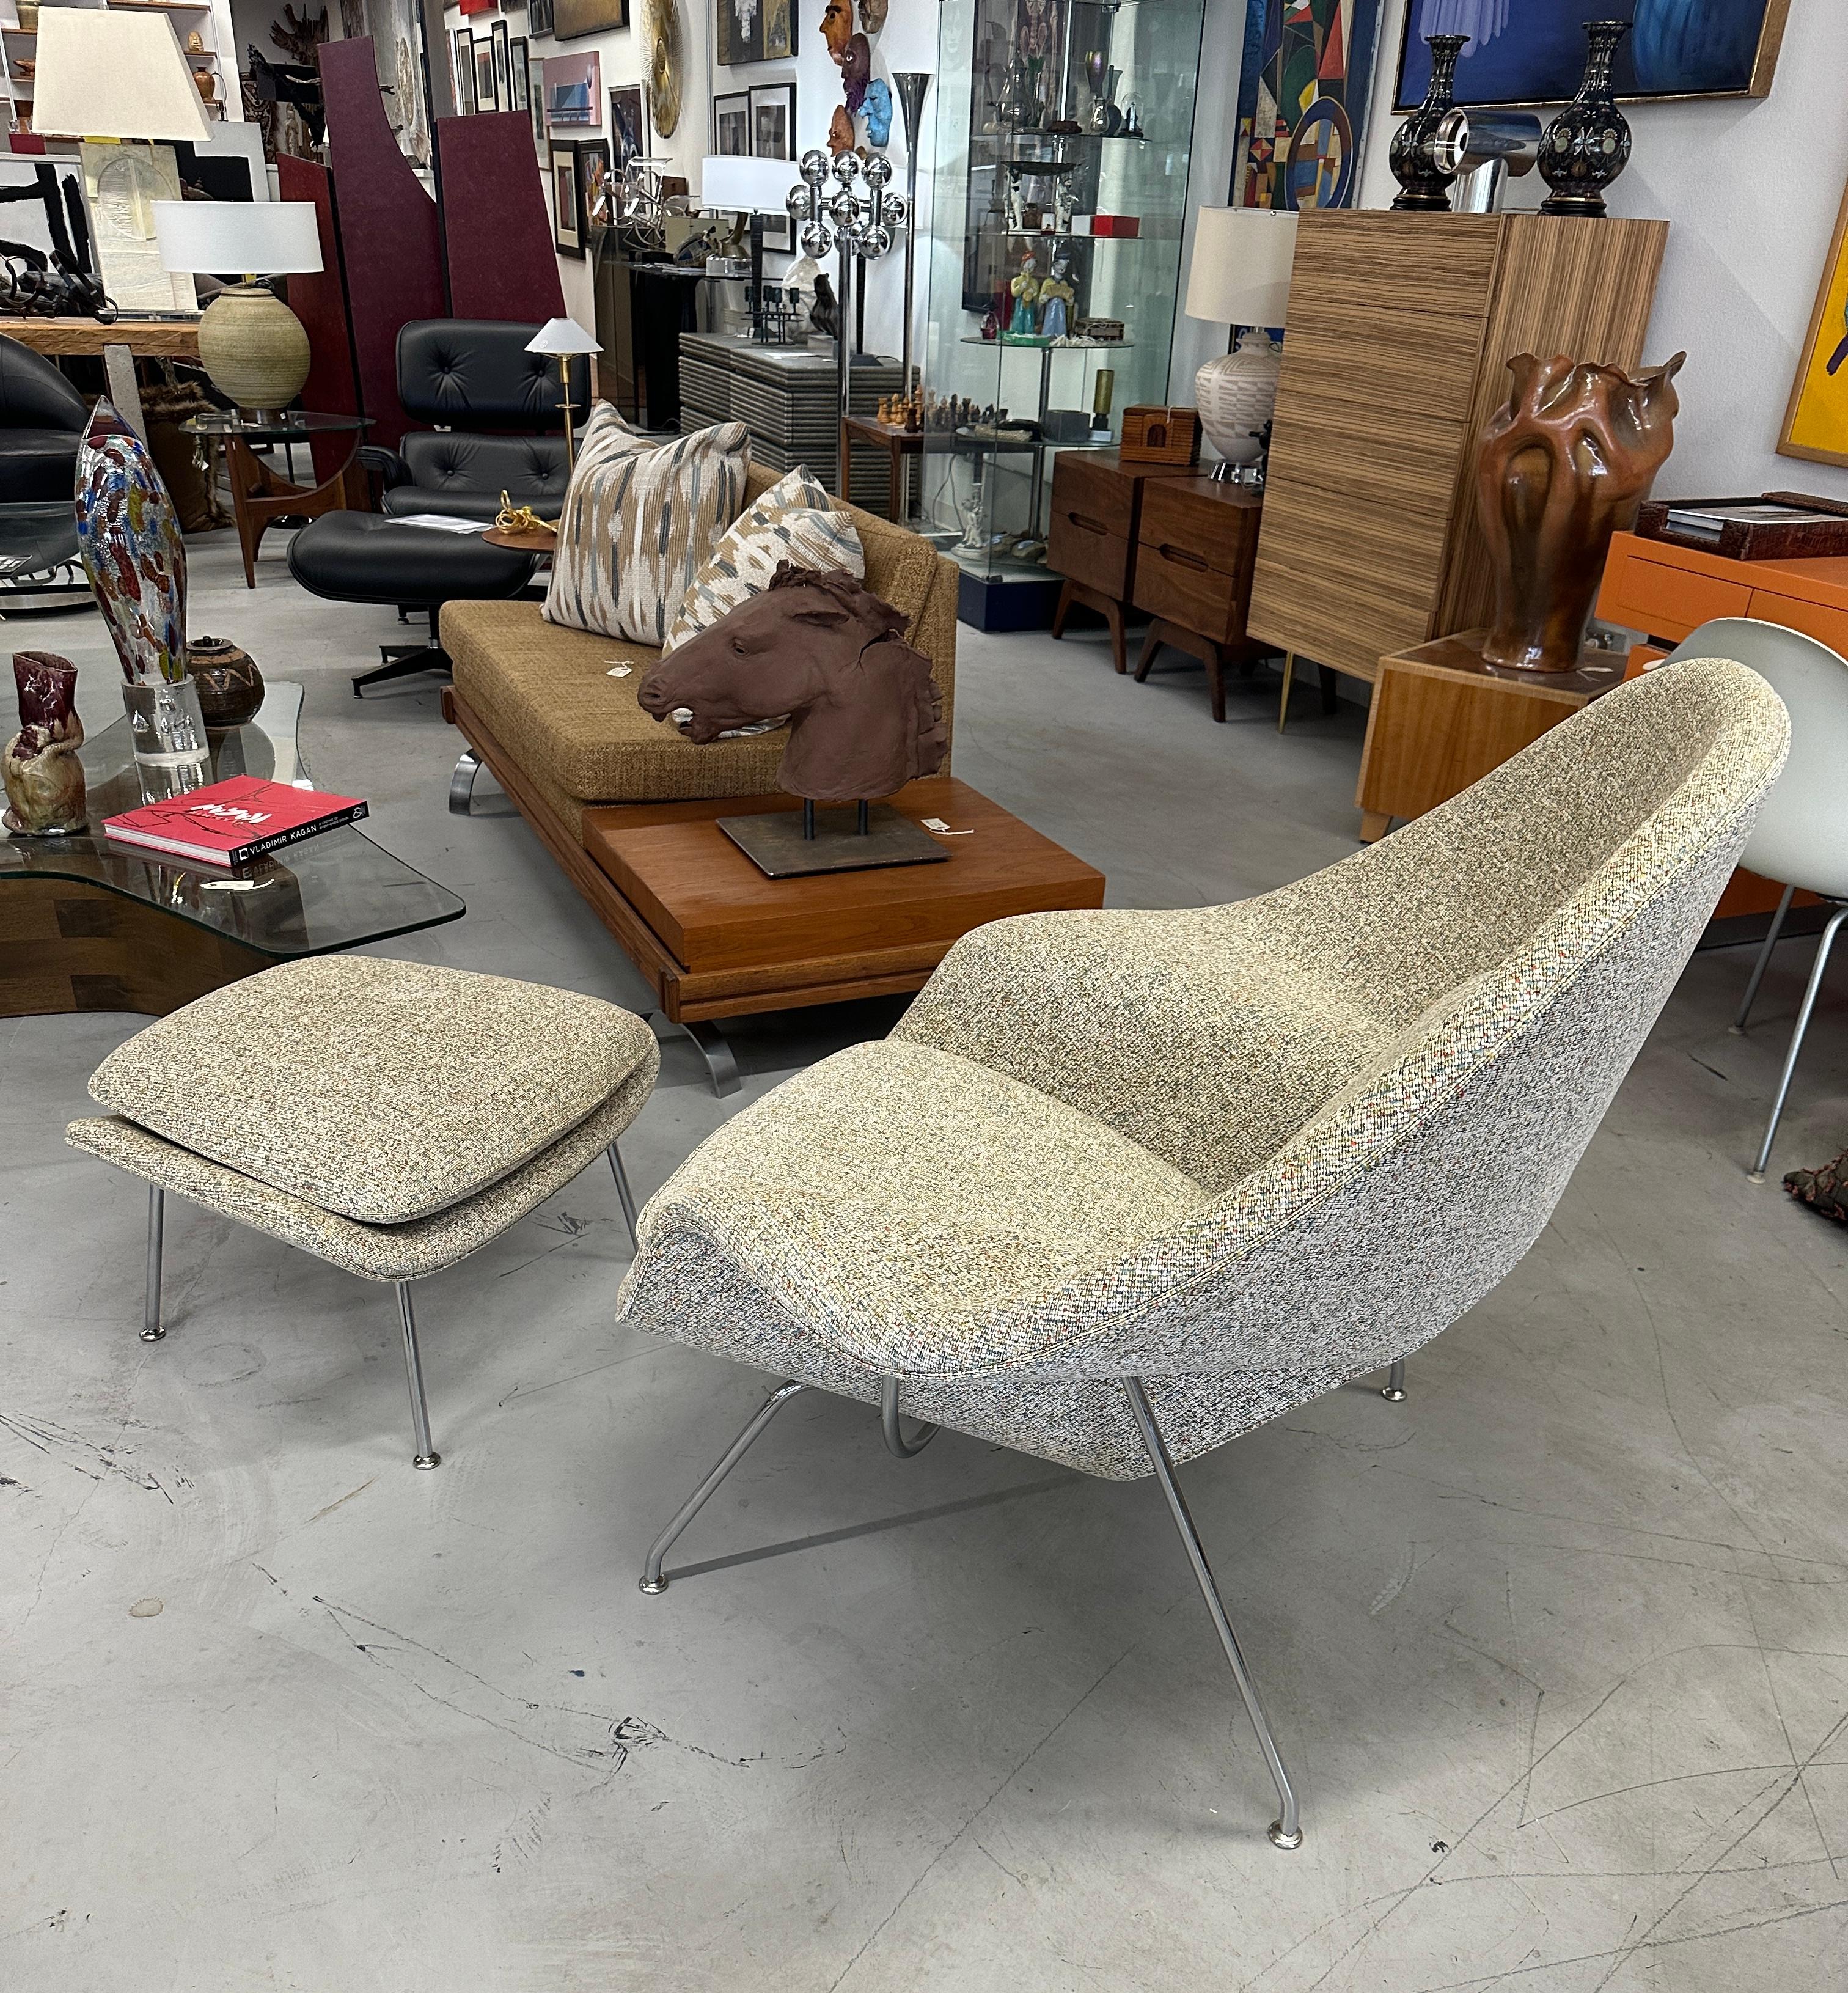 A beautiful Eero Saarinen designed Womb chair and ottoman for Knoll. Late 20th century vintage. Not sure of the fabric name but it is a nubby fabric with subtle tones of orange, turquoise and green on a cream base. The legs are chromed steel. Both